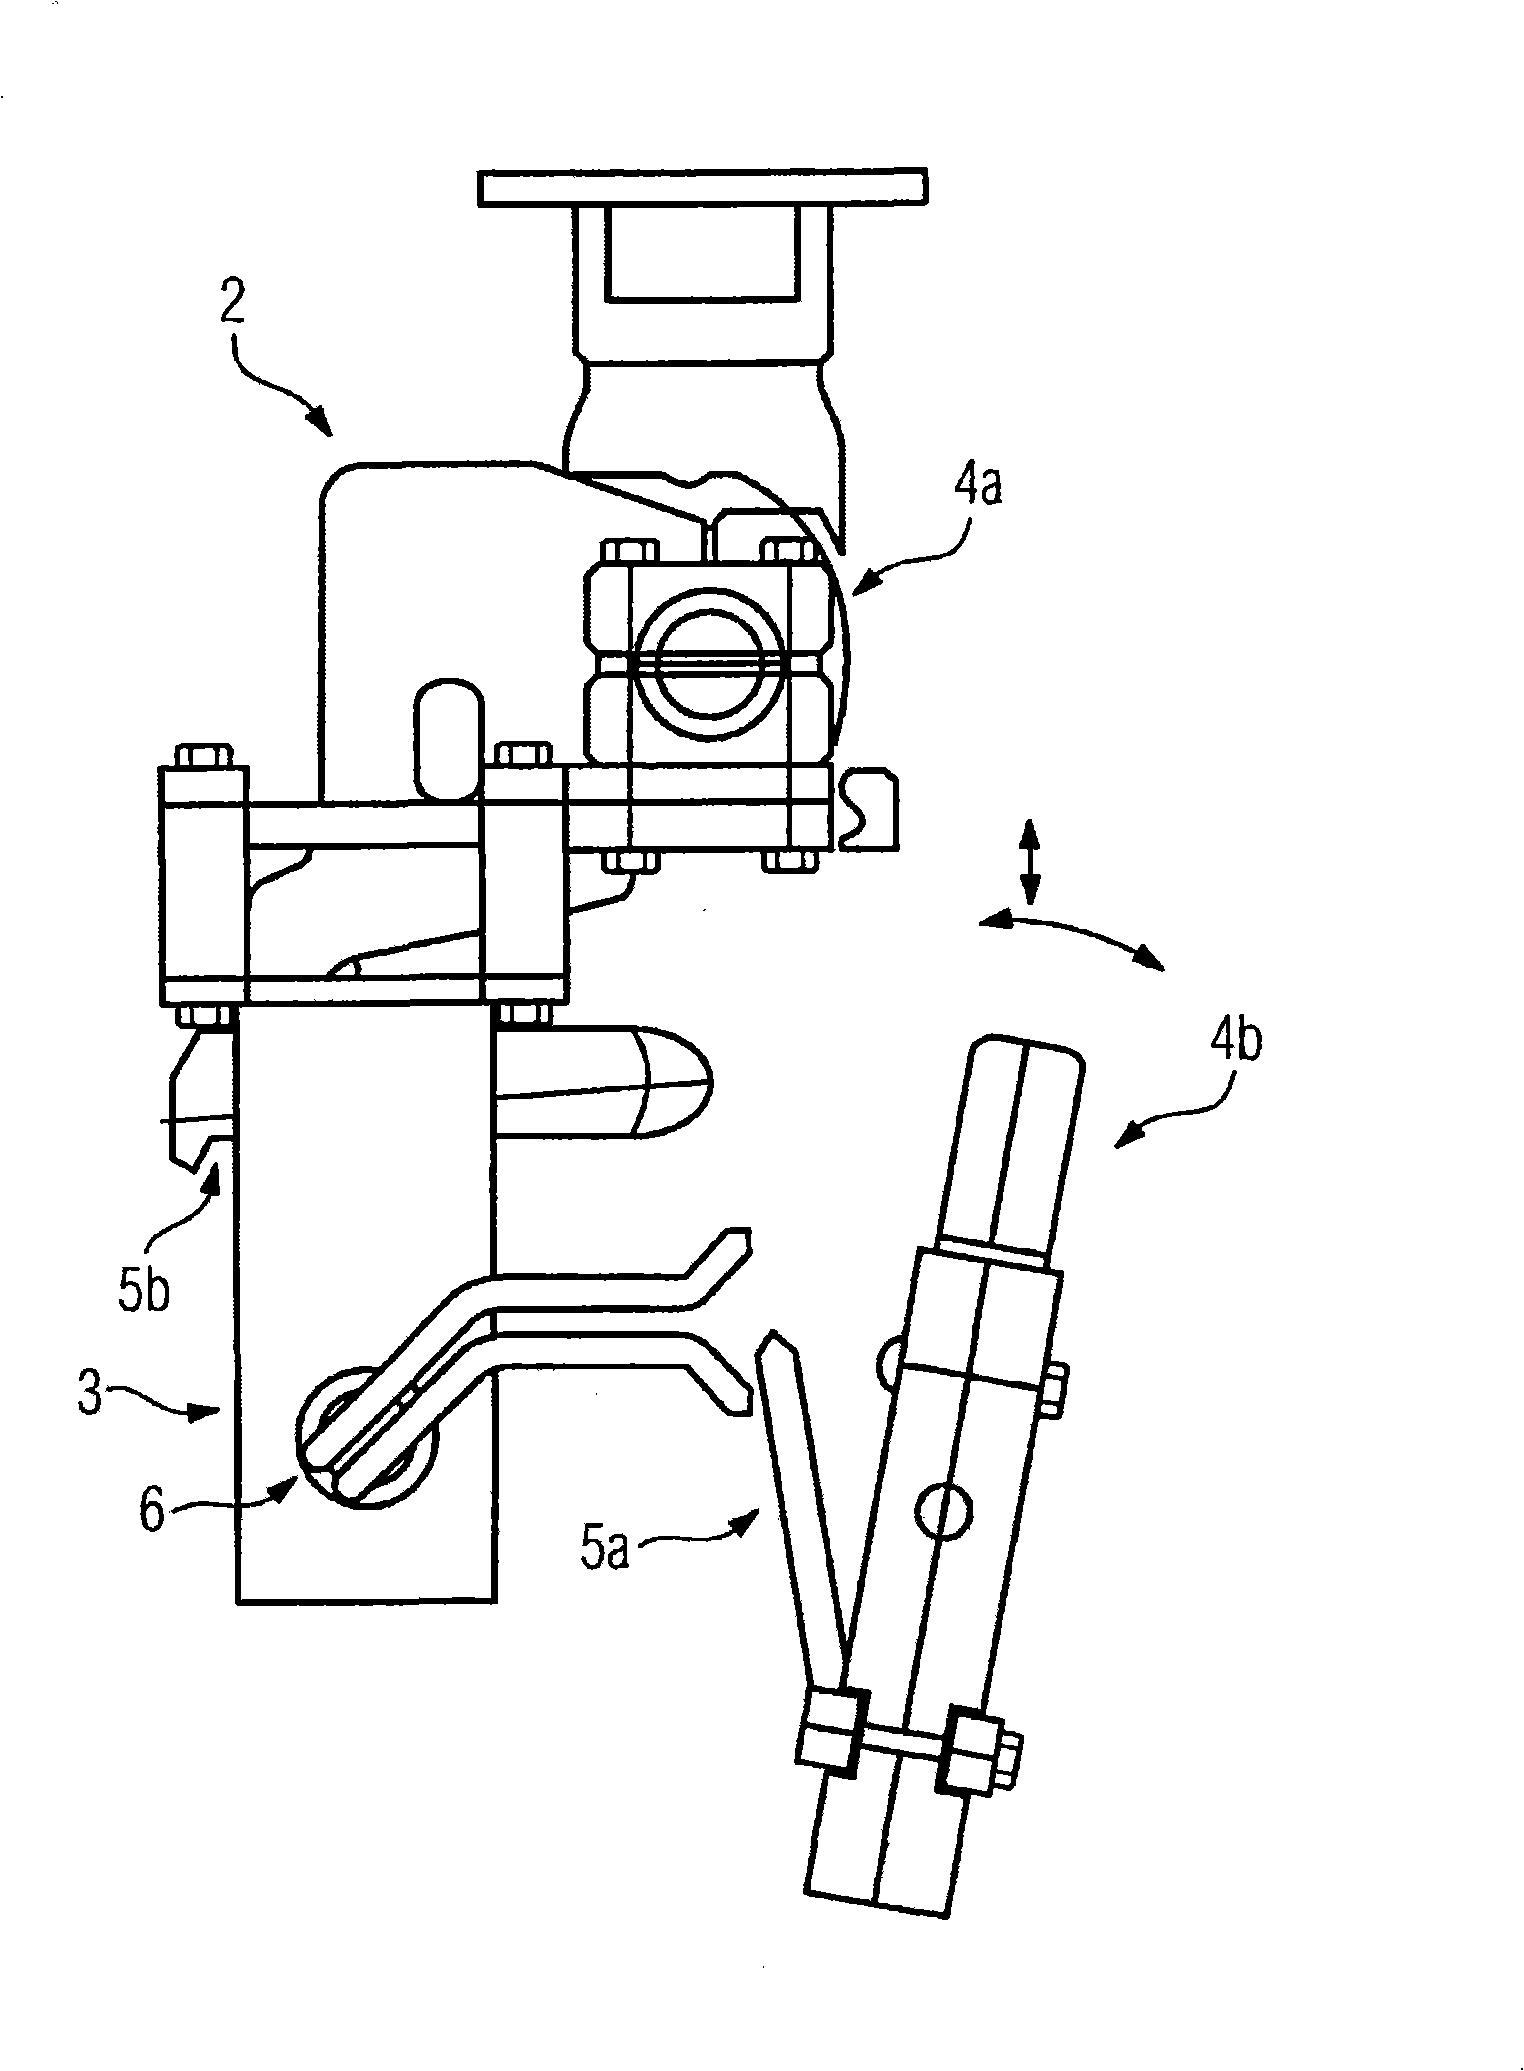 Electrical switching device